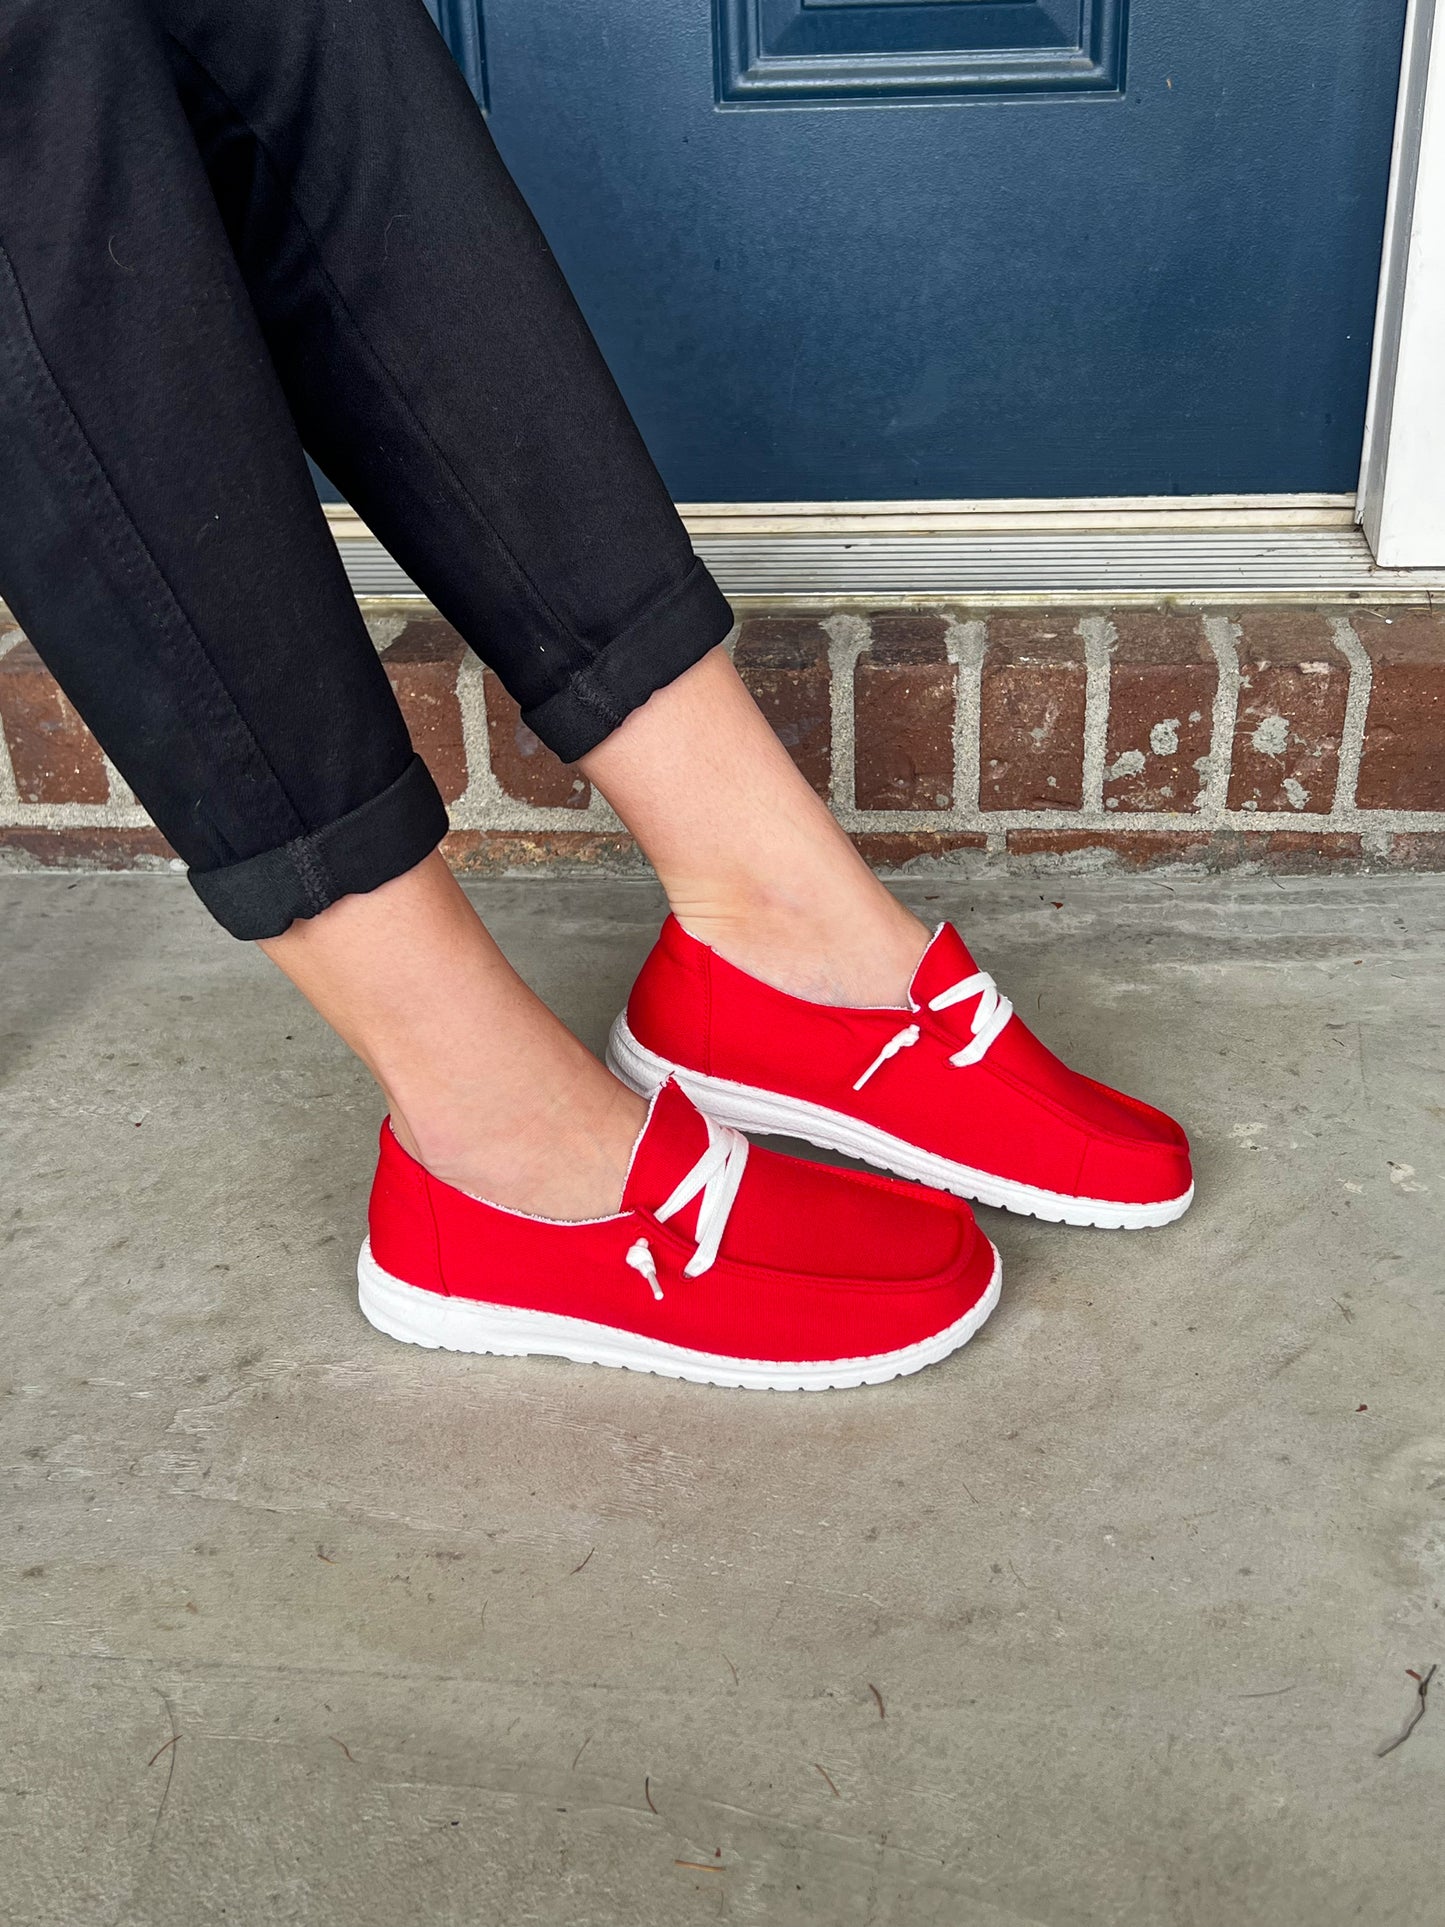 Gypsy Jazz Game Day Slip-on Sneakers - Red